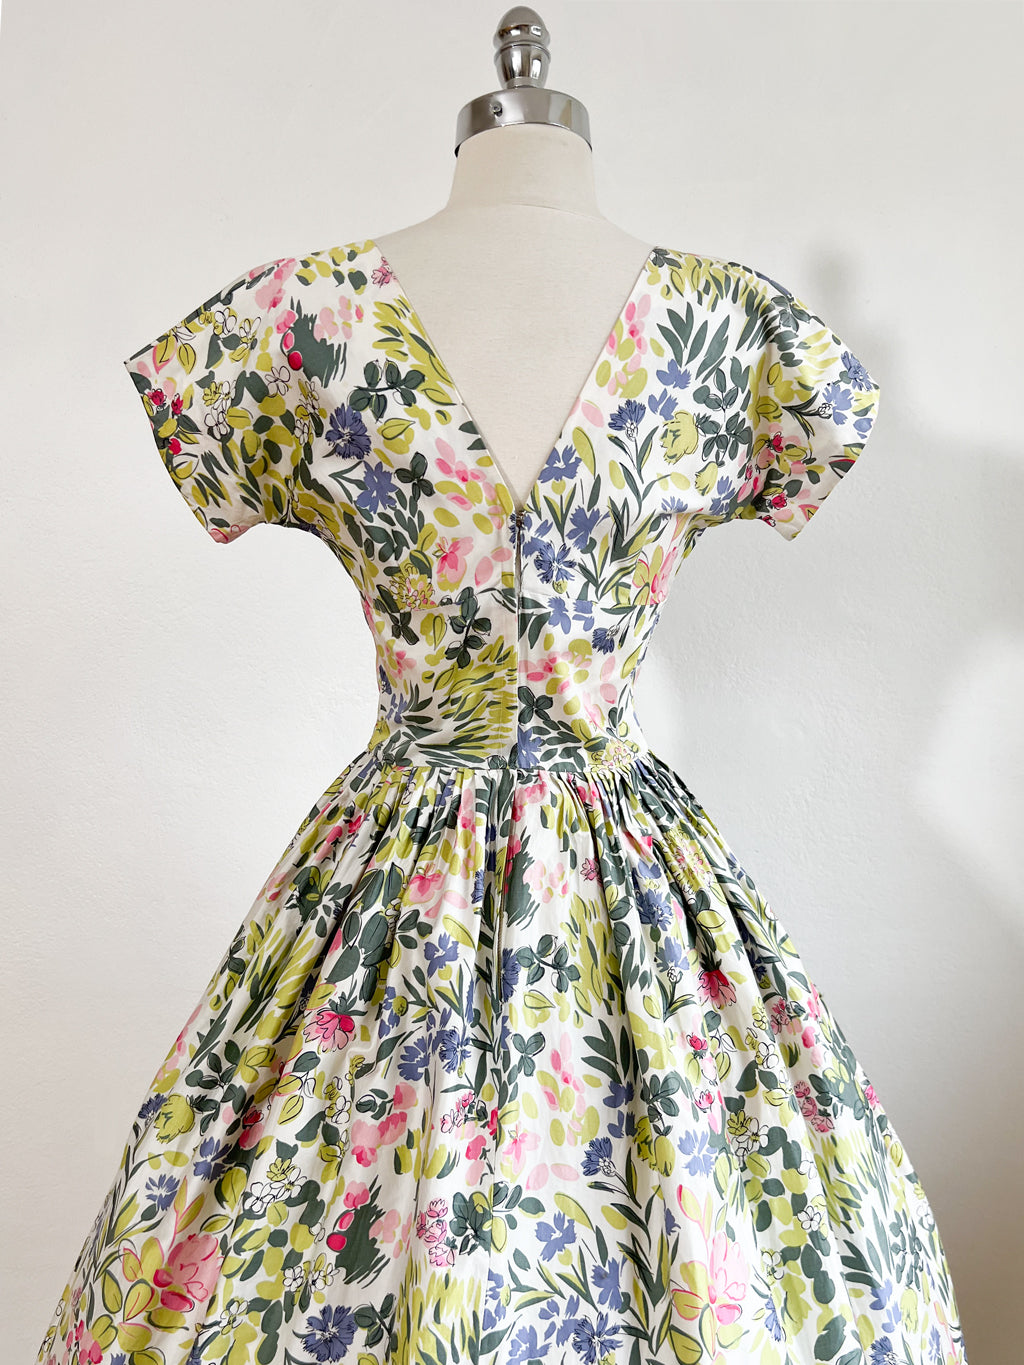 Vintage 1950s Dress - SPECTACULAR Chartreuse Sage Pink Floral Print Party Junior Time Sundress w Rhinestones Size XS to S